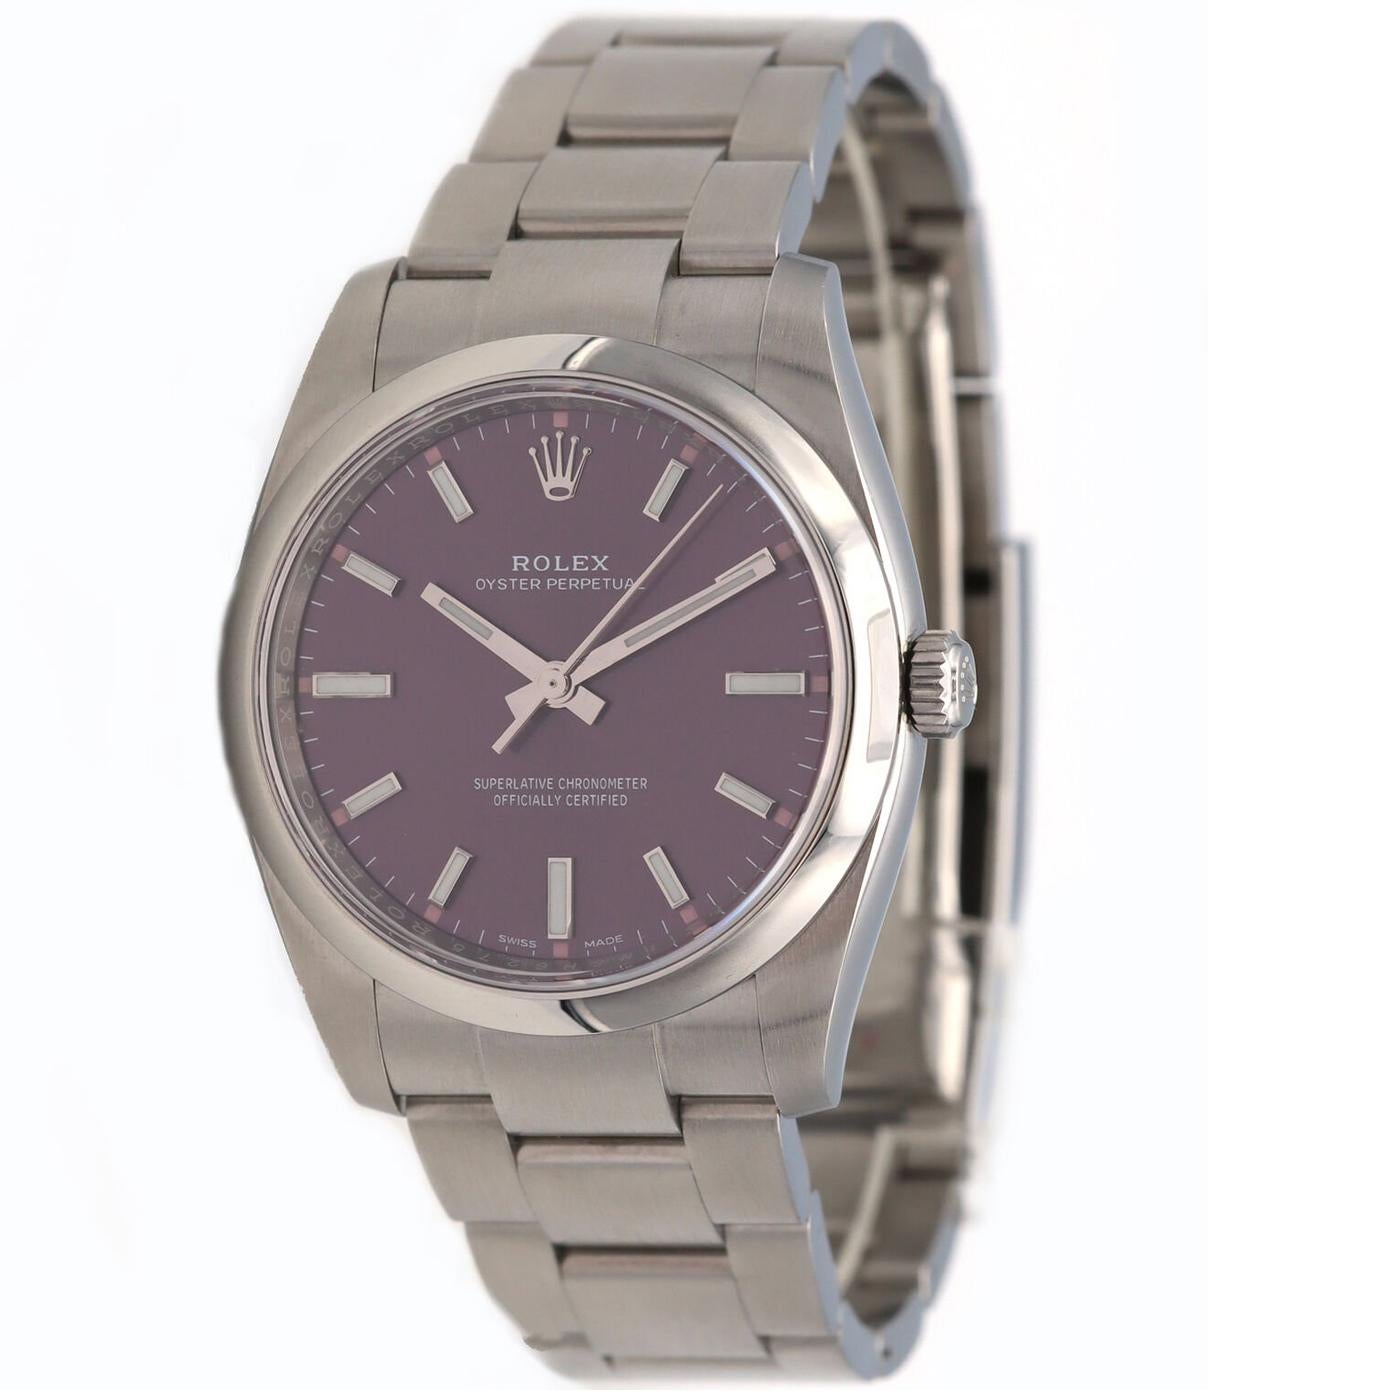 Rolex Perpetual Oyster Perpetual 34 Watch of Stainless Steel. Red grape dial with index hour markers. Screw-down solid crown with twin lock double waterproofness system. Scratch-resistant sapphire crystal. The watch has central hour, minute, and